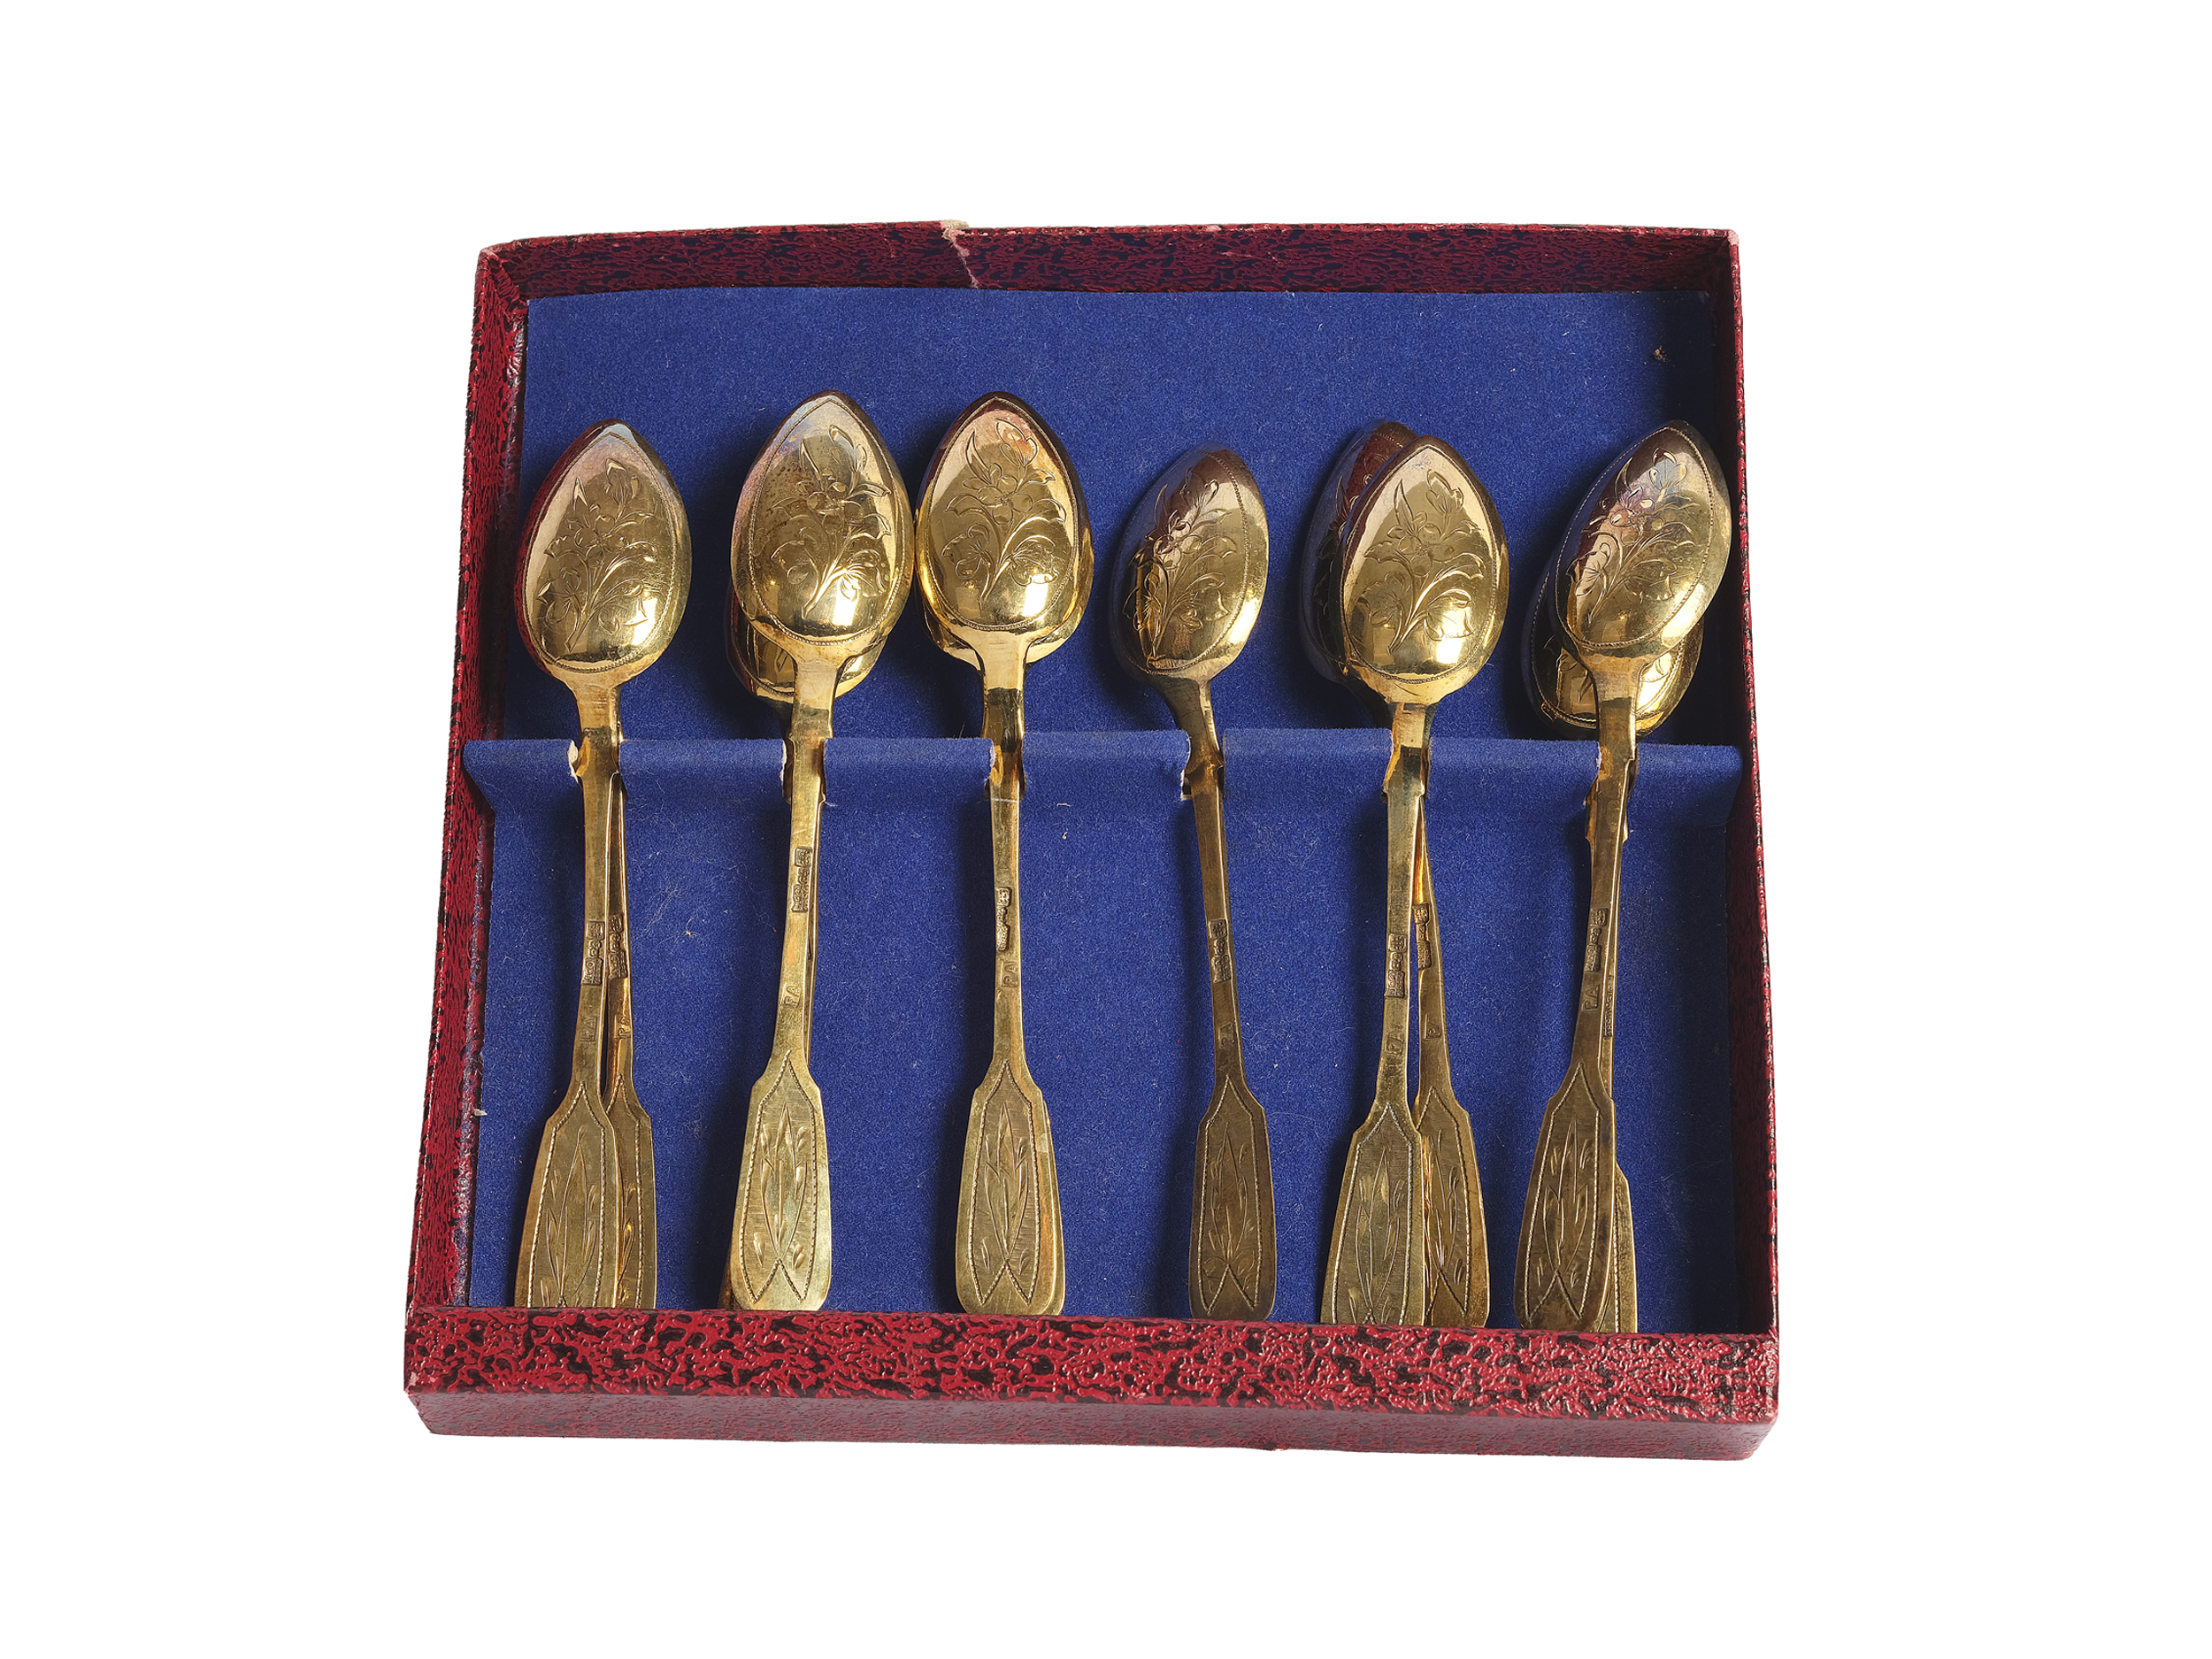 11 coffee spoons - Image 2 of 2